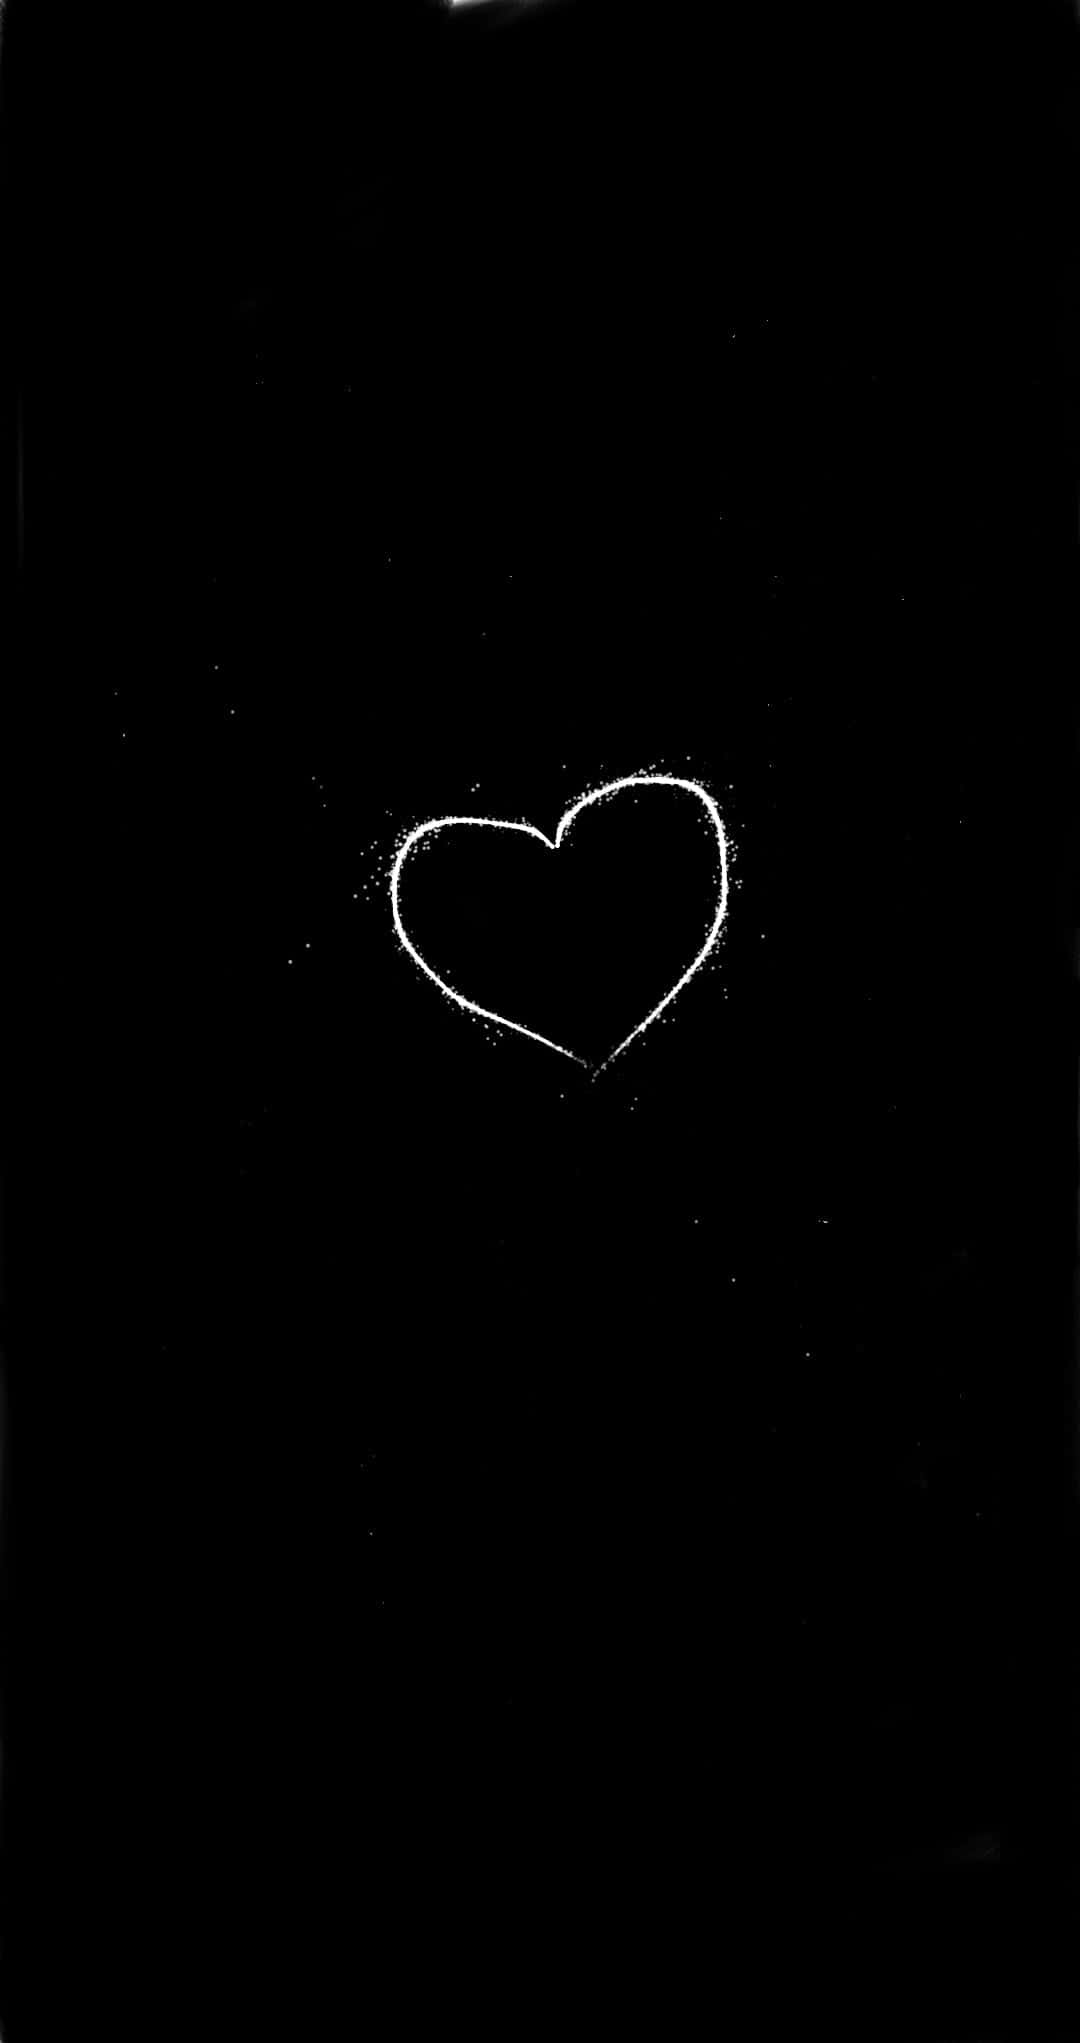 A beautiful black heart with shimmering highlights Wallpaper